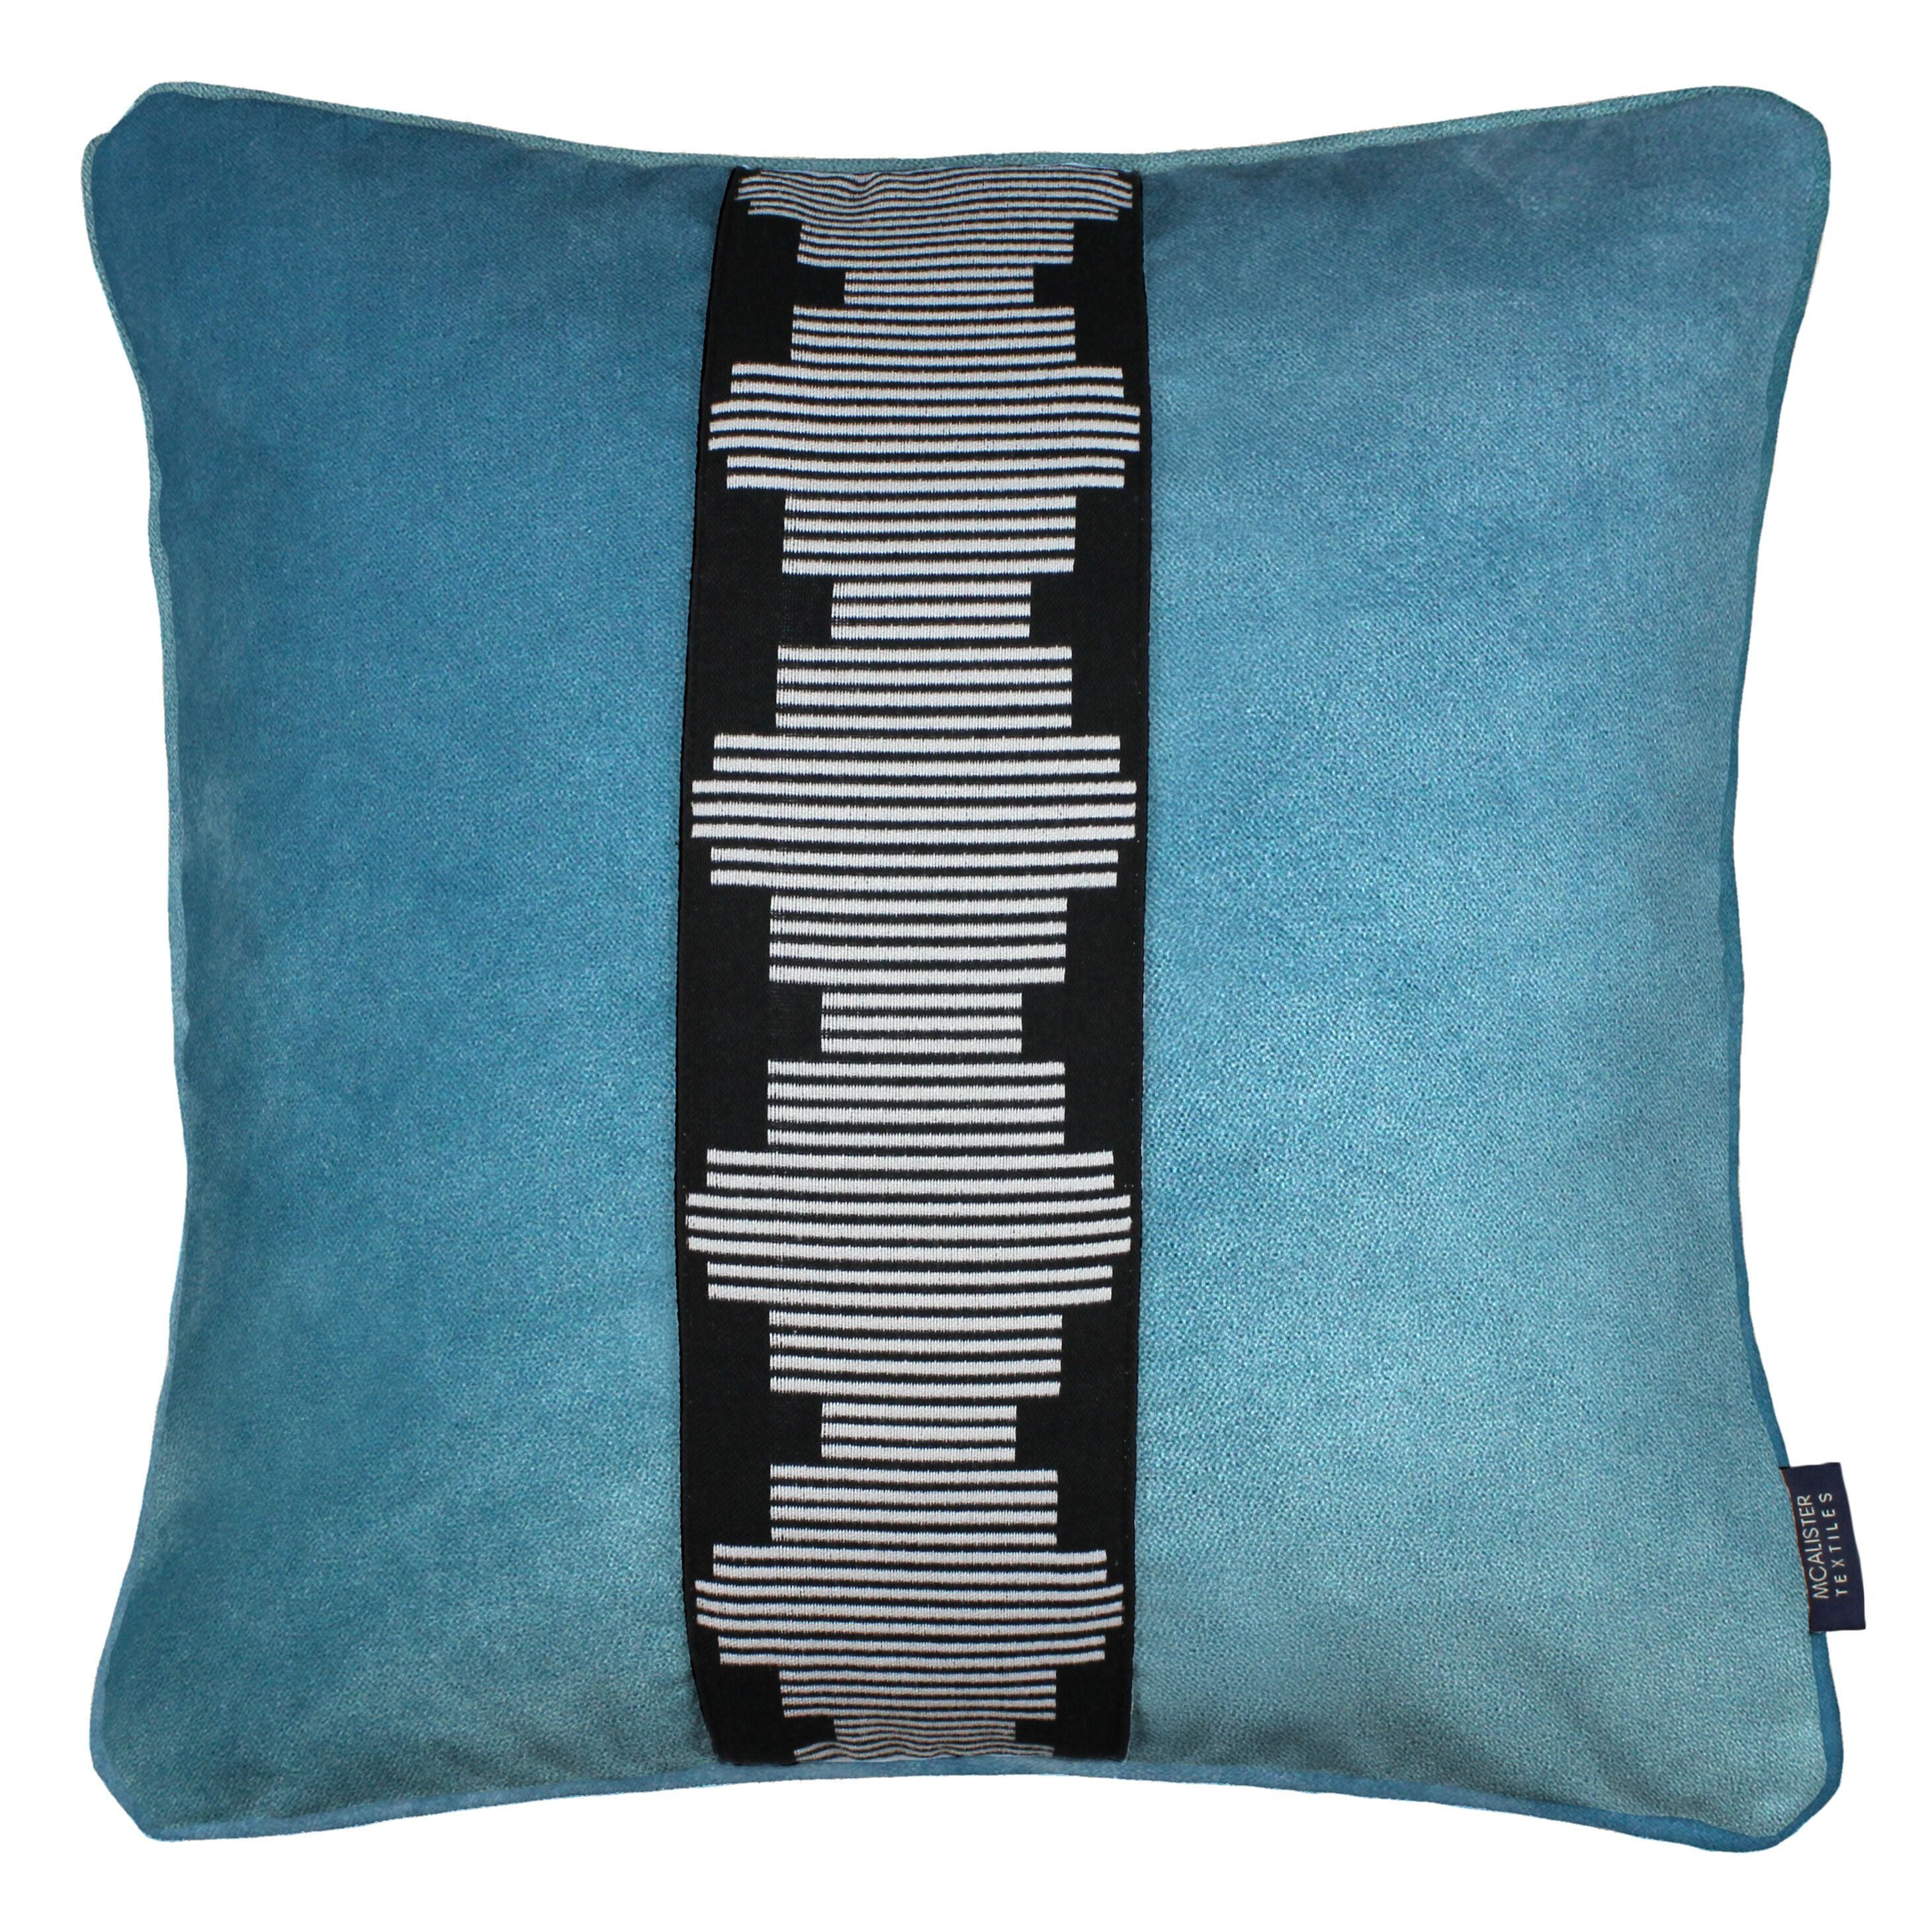 McAlister Textiles Maya Striped Duck Egg Blue Velvet Cushion Cushions and Covers Cover Only 43cm x 43cm 